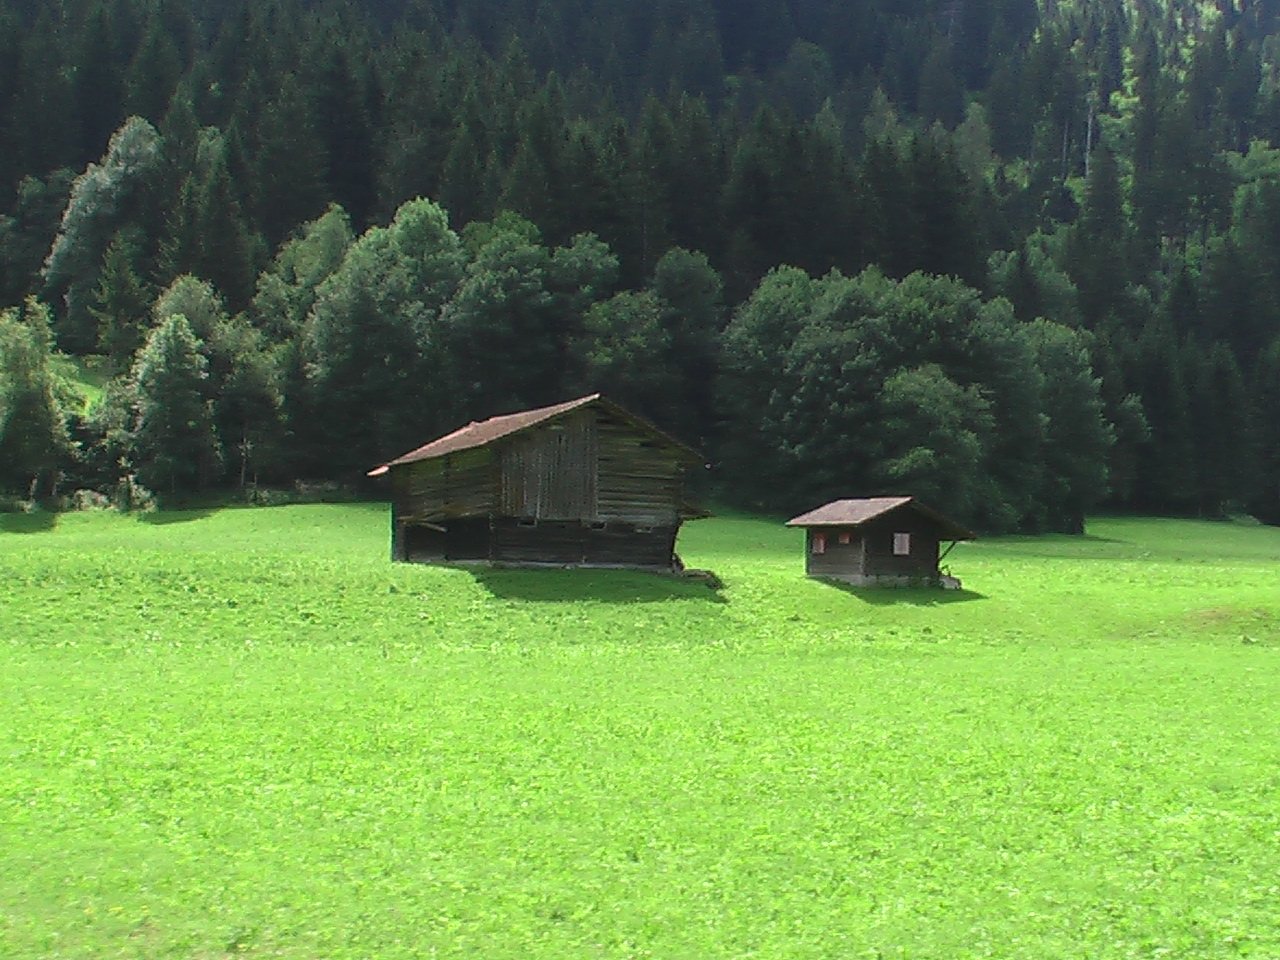 an image of a grassy field with two cabins